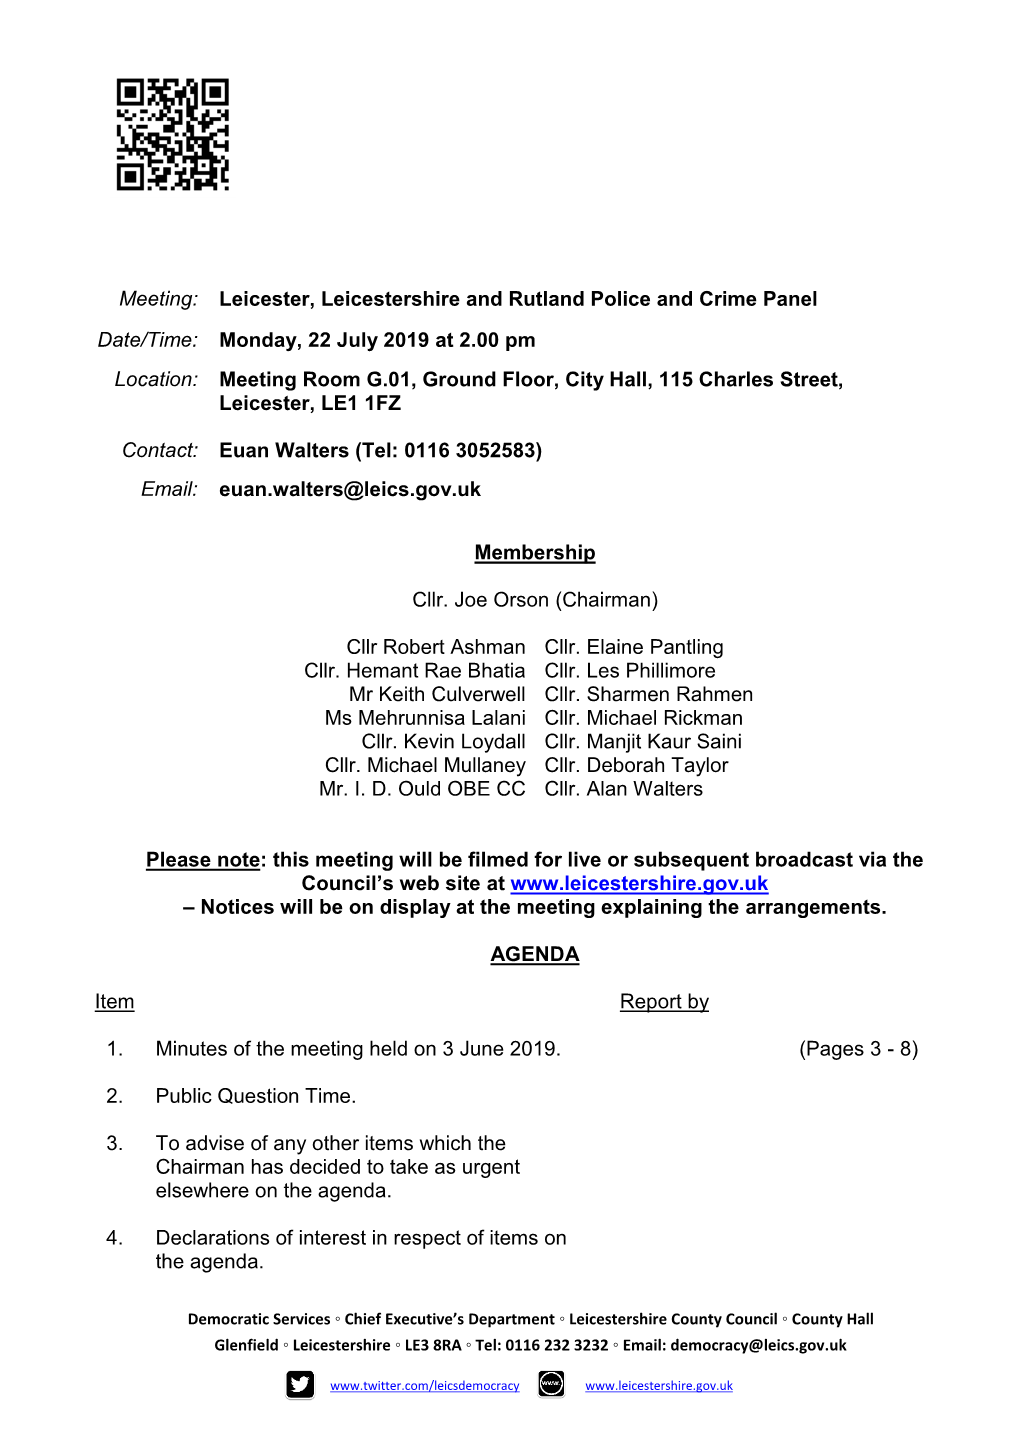 Agenda Document for Leicester, Leicestershire and Rutland Police